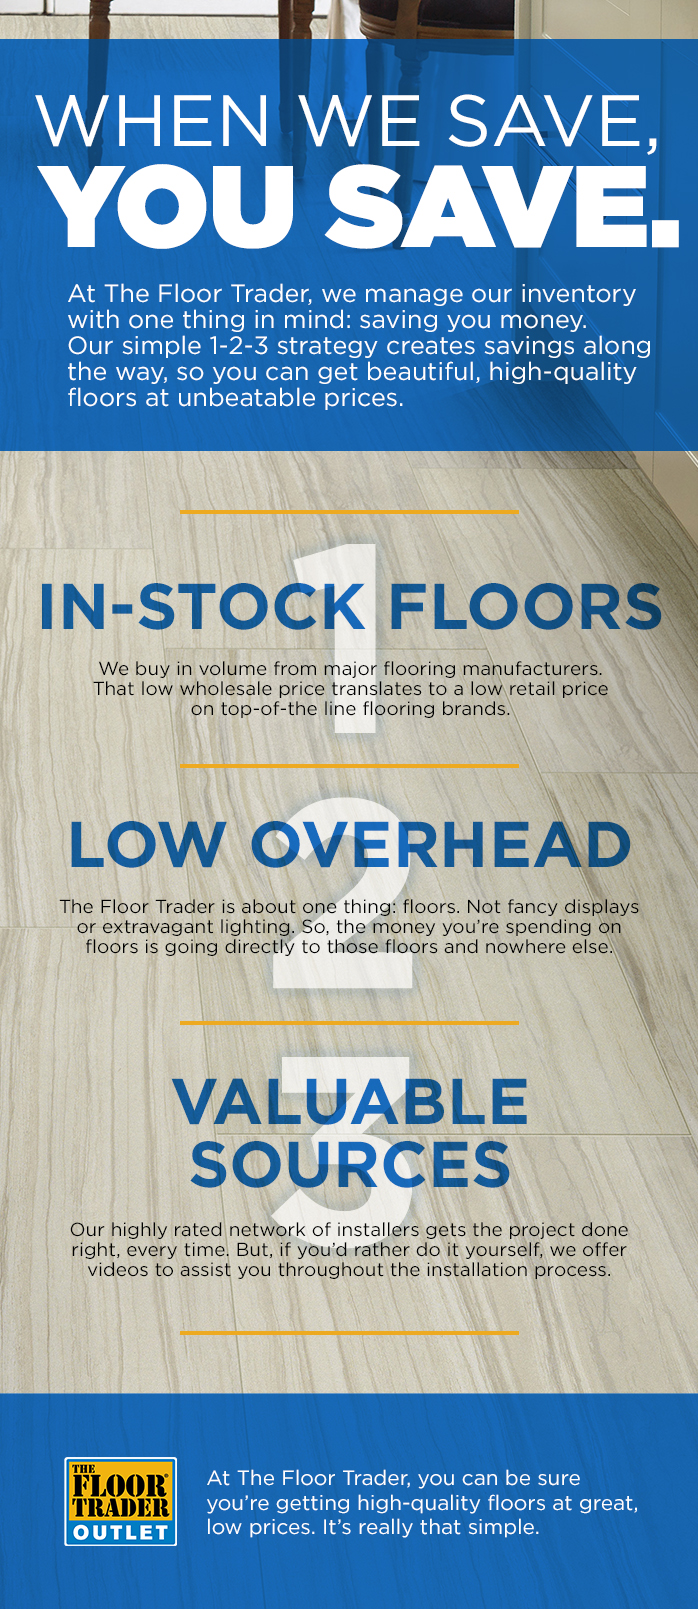 Floor Trader Theory of Outletivity